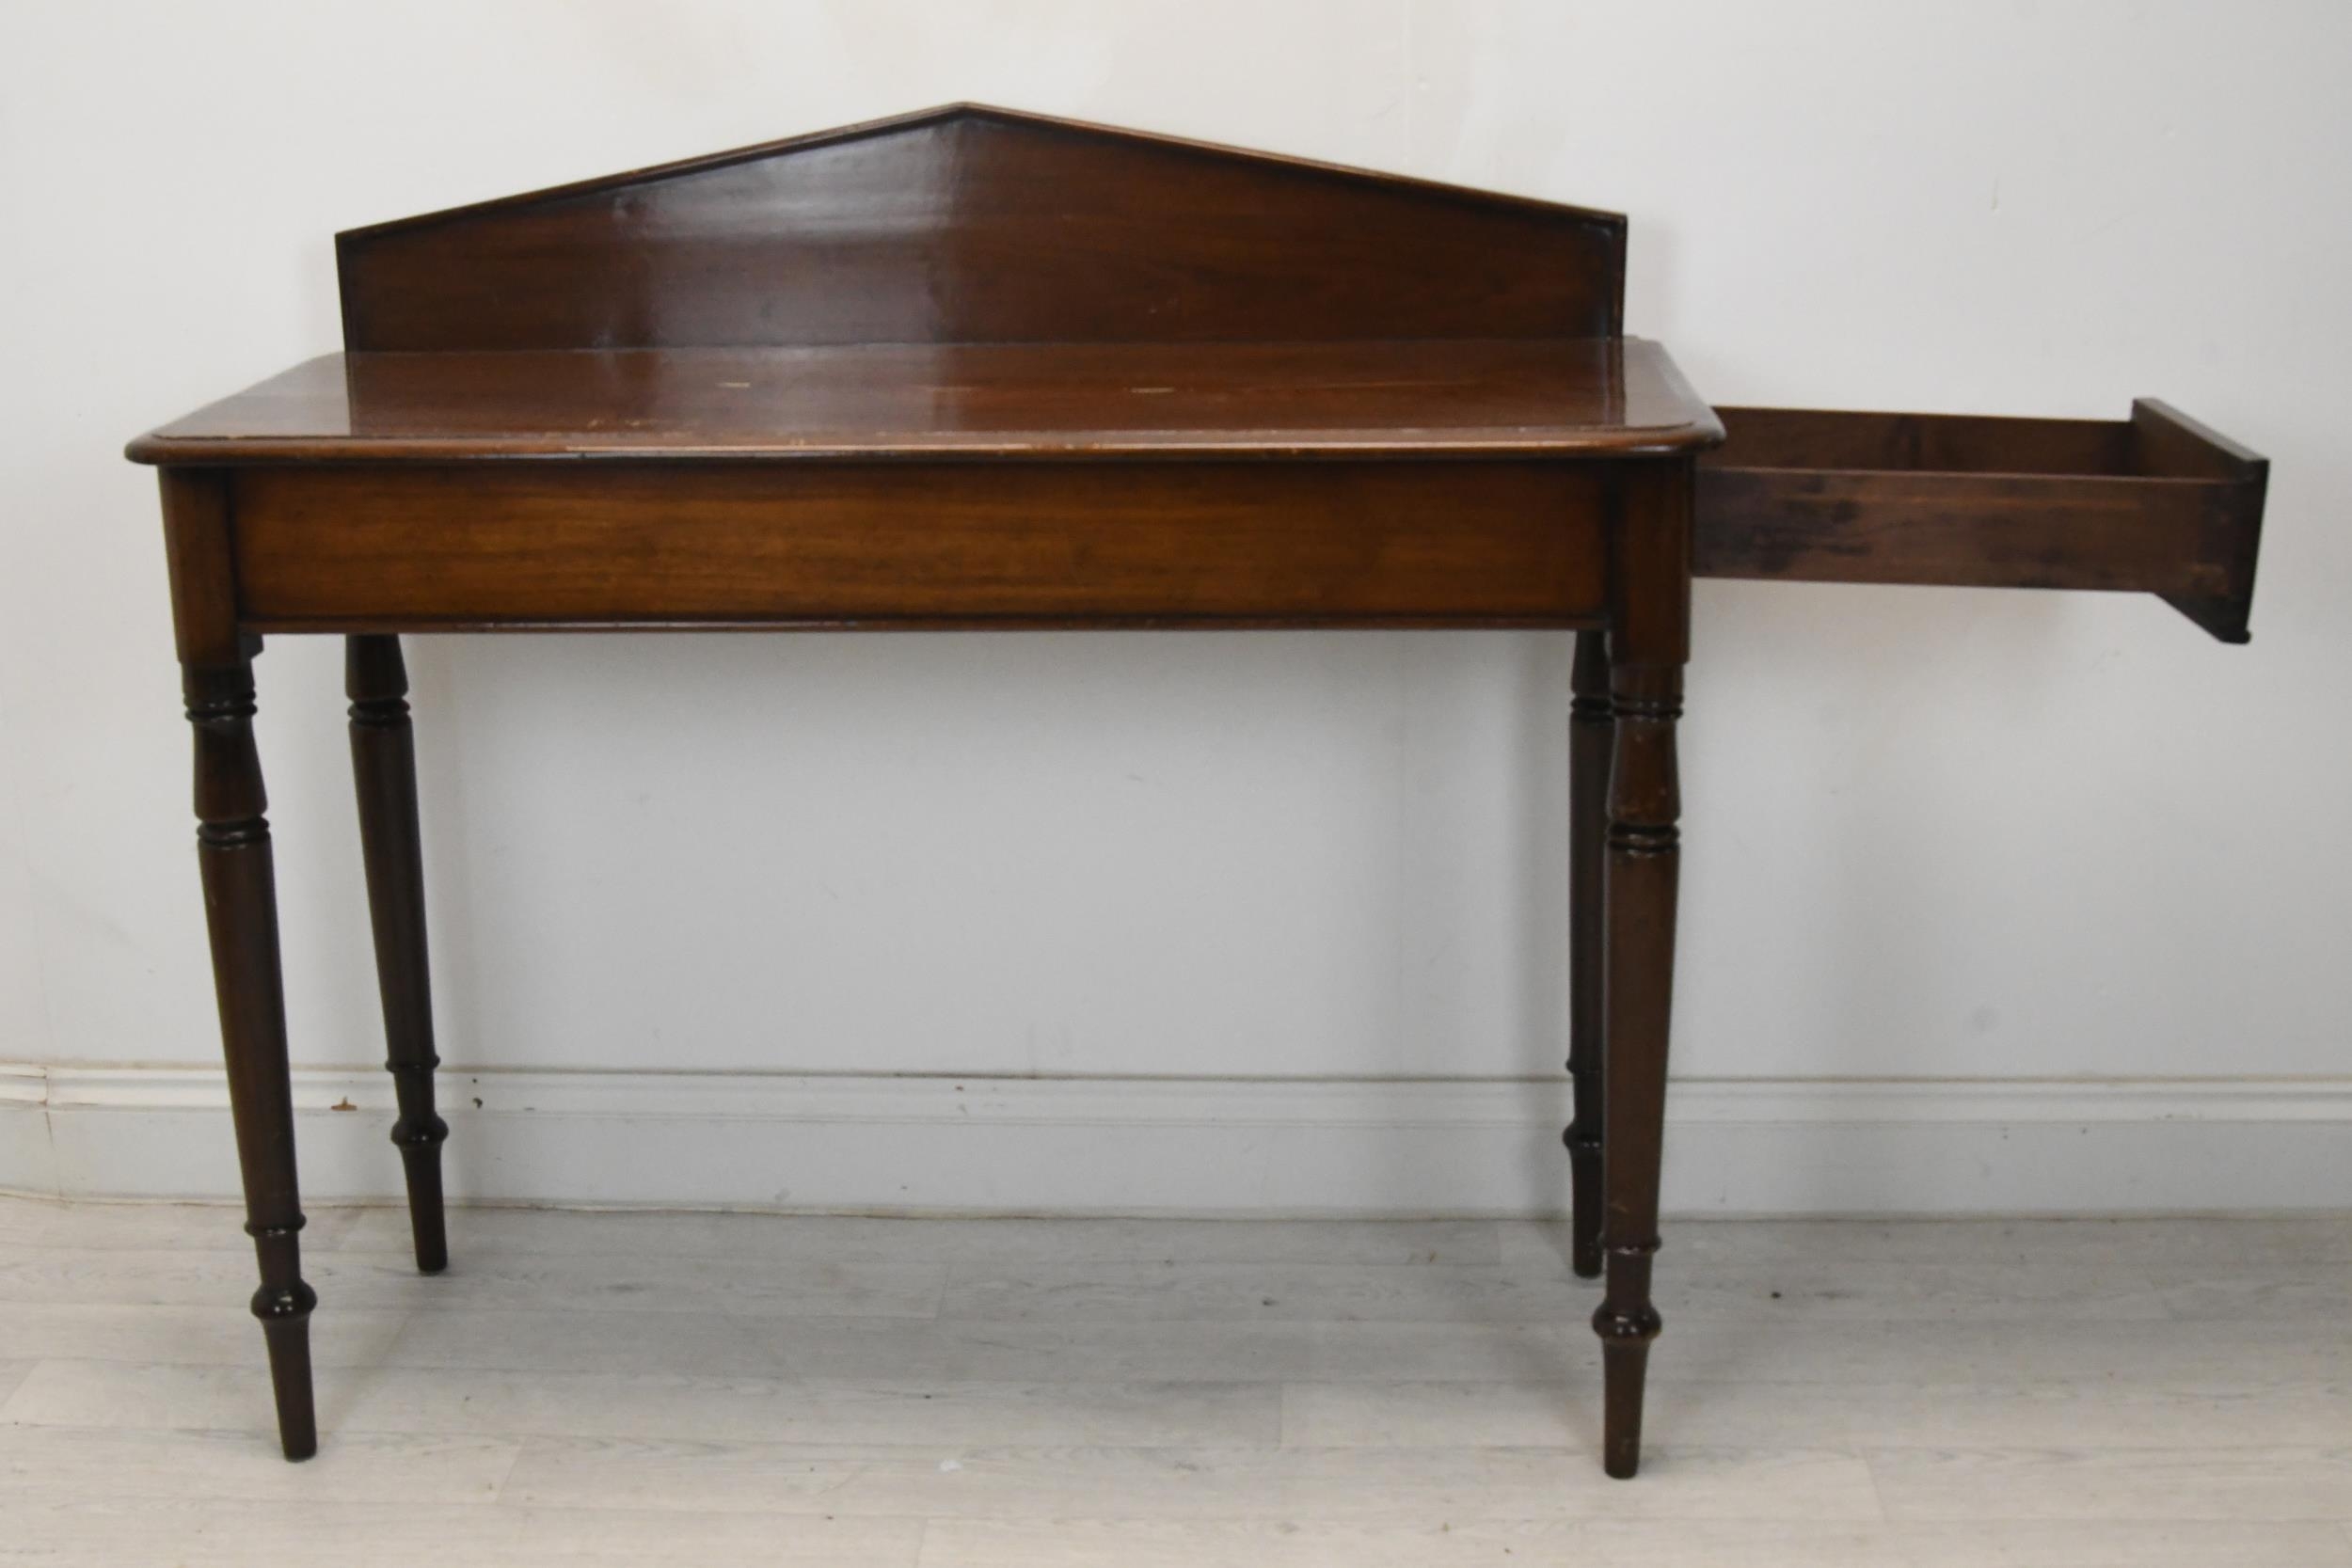 Console table, mid 19th century mahogany on turned supports. H.98 W.102 D.42 (Some damage as seen). - Image 4 of 6